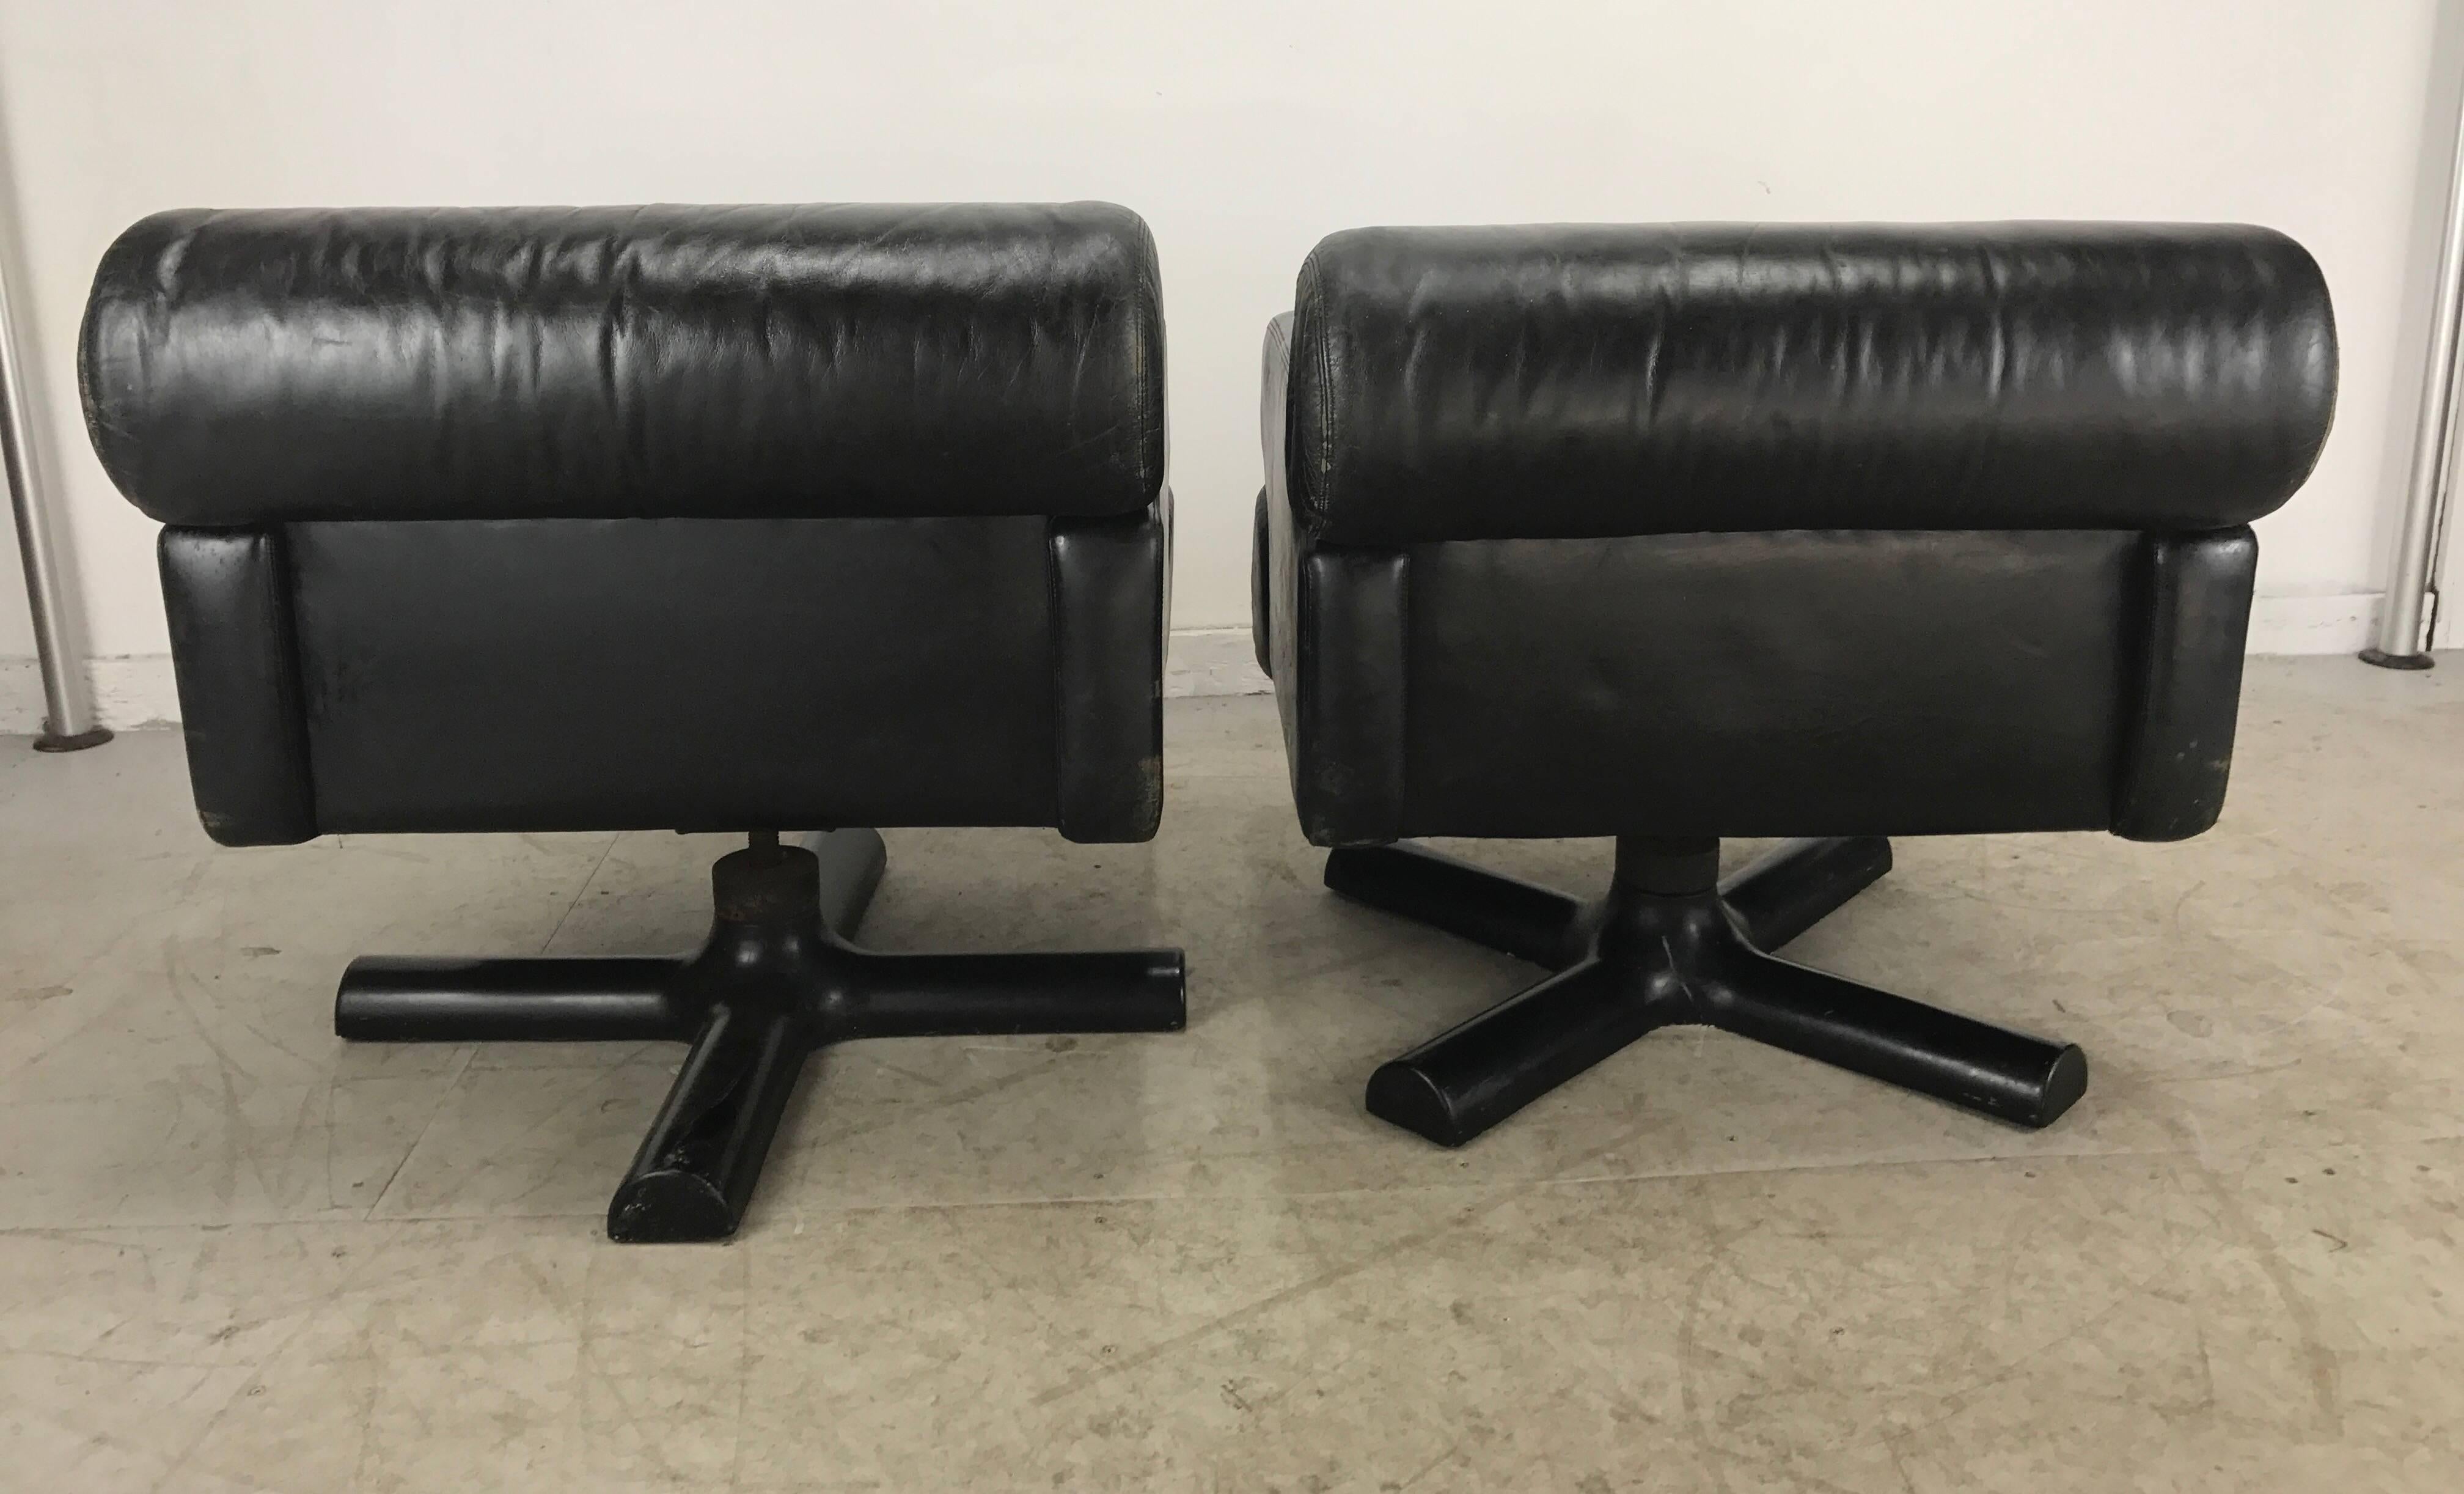 Steel Rare Black Leather Pop Modernist, Space Age Chairs by William Lancing Plumb